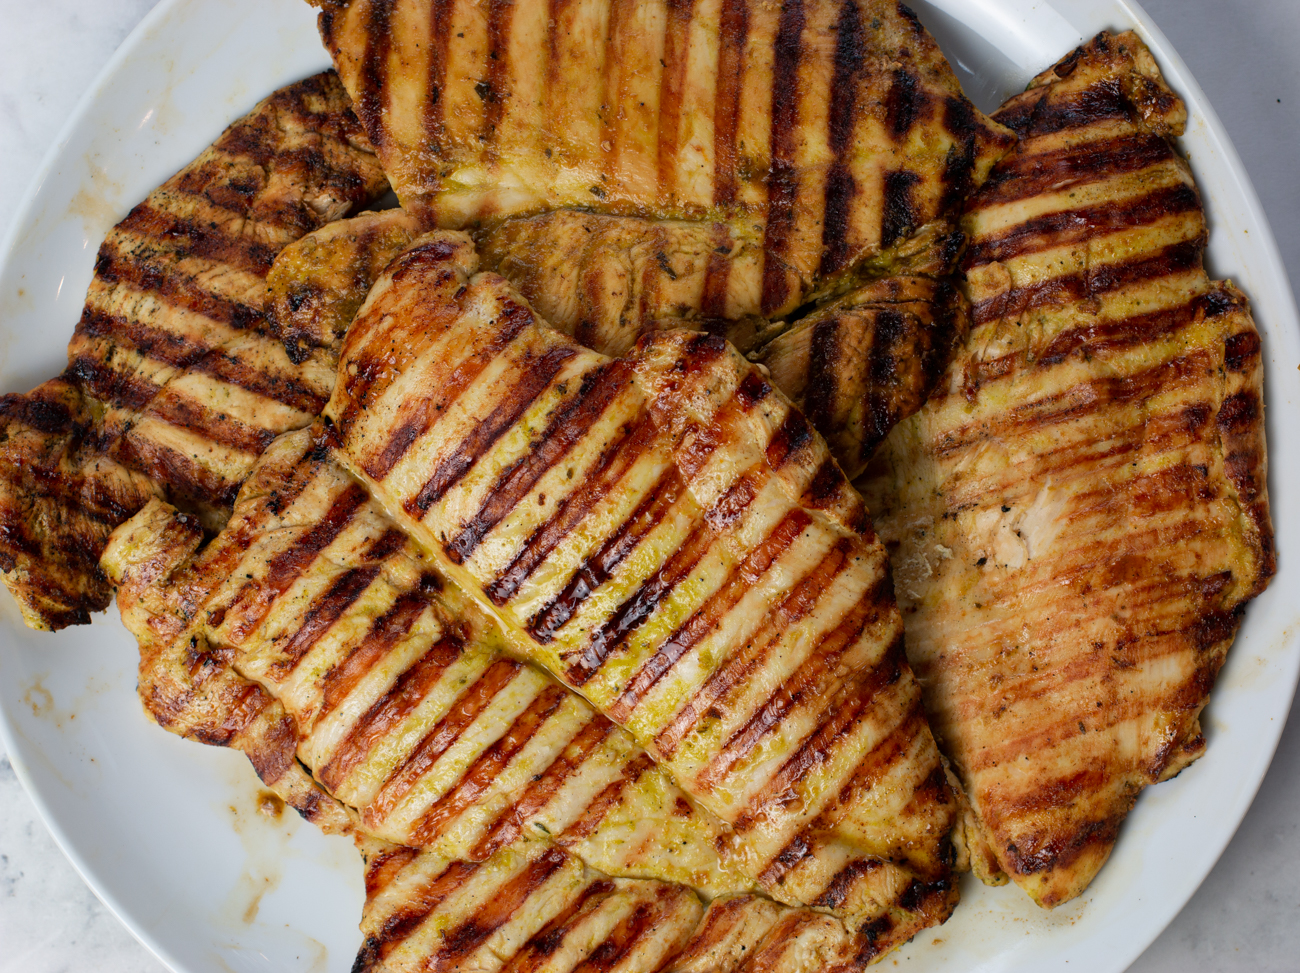 Grill the chicken breasts - I have used a cast iron grill pan 